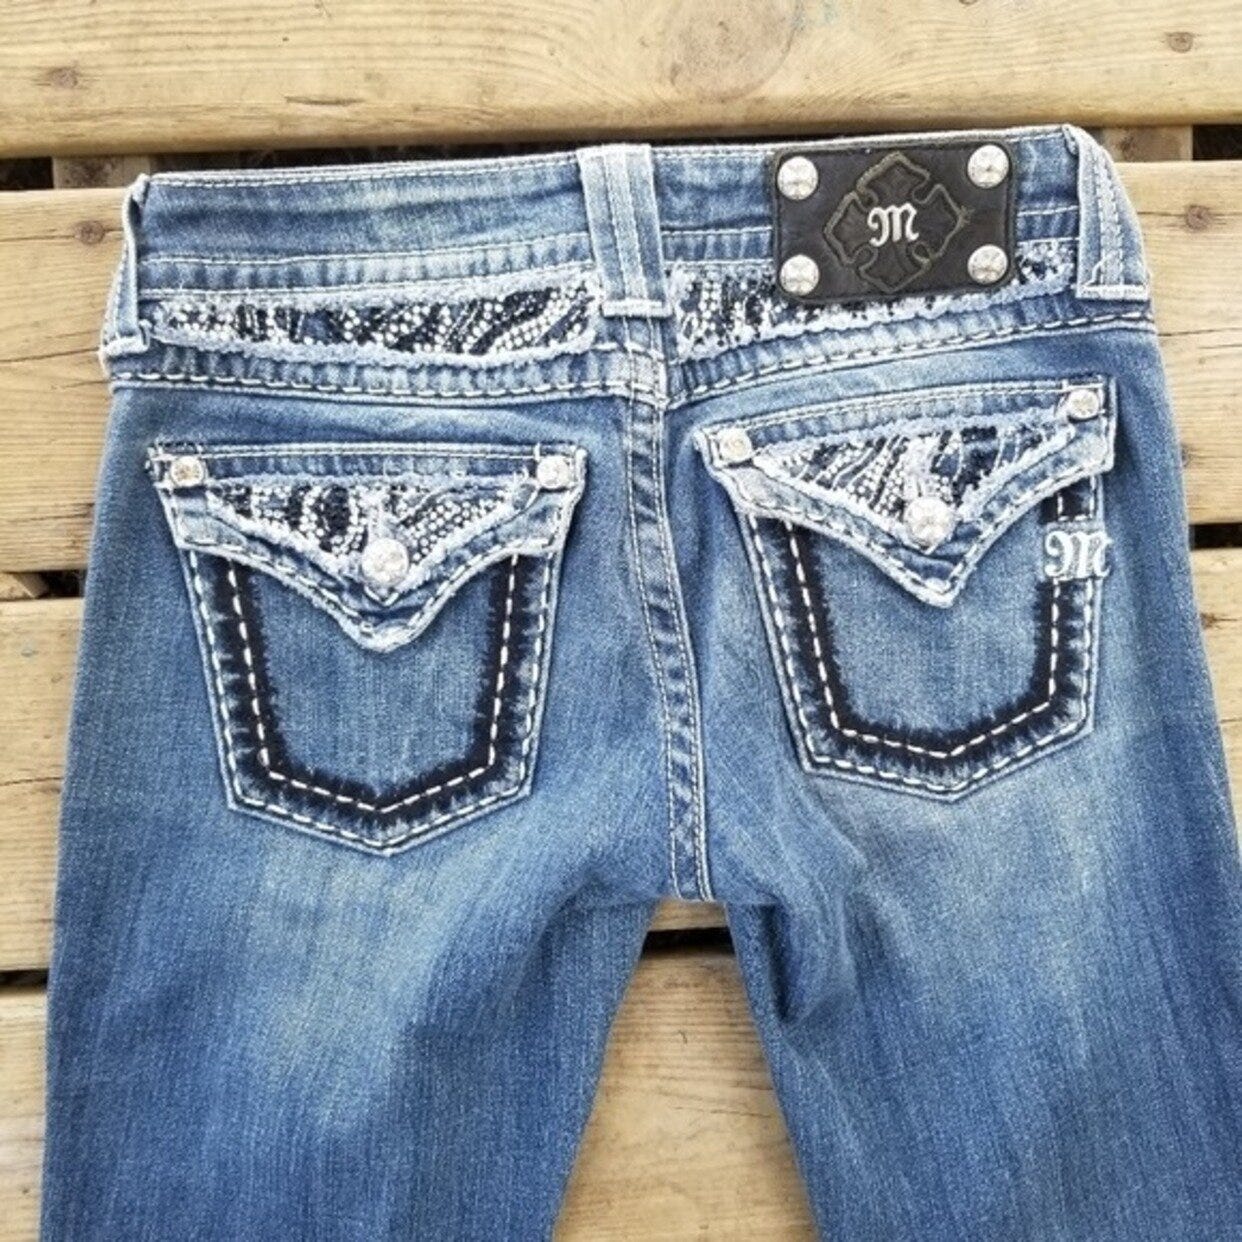 Pair of blue jeans with excessive white stitching and jewels on the butt